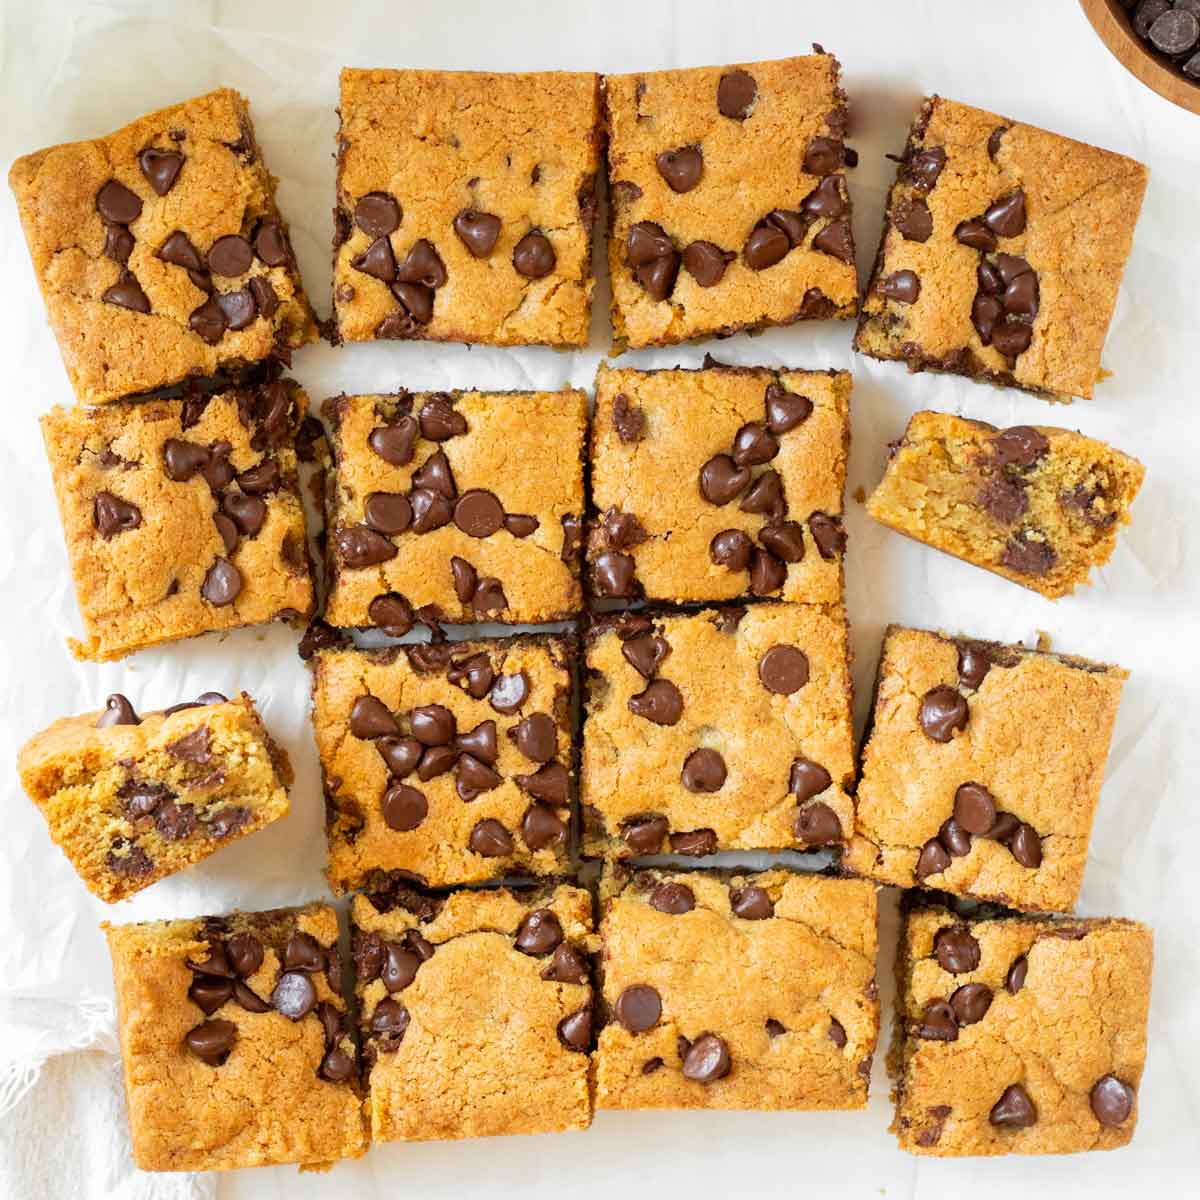 These chocolate chip cookie bars are soft and chewy homemade cookie bars filled with chocolate chips and perfect for making as a weekend treat or to share at a party or potluck.